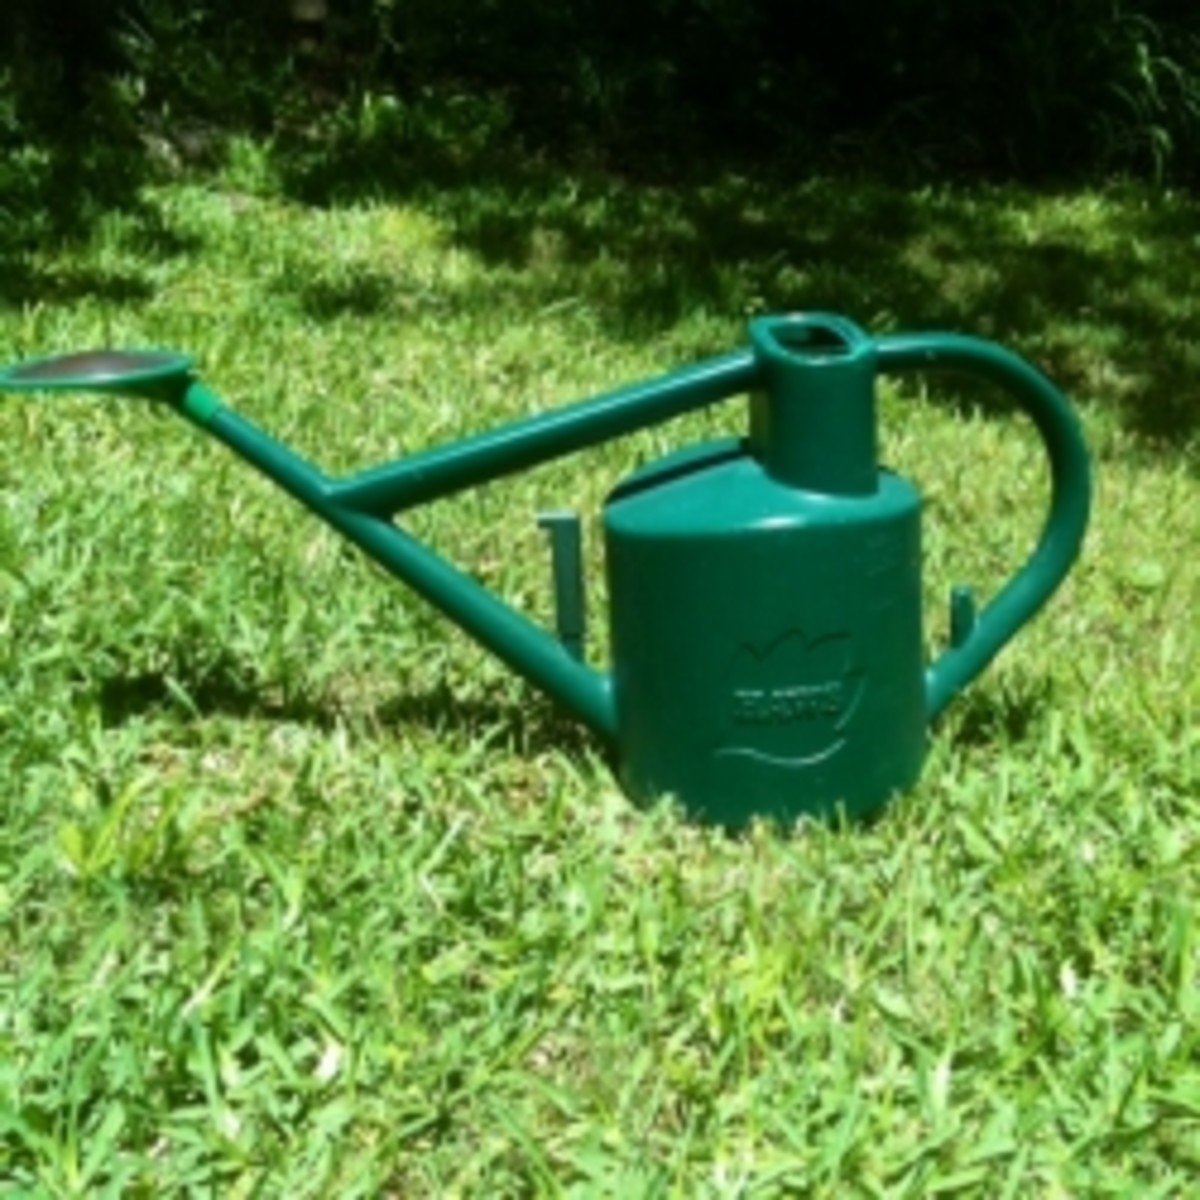 The Best Watering Can for your Home and Garden